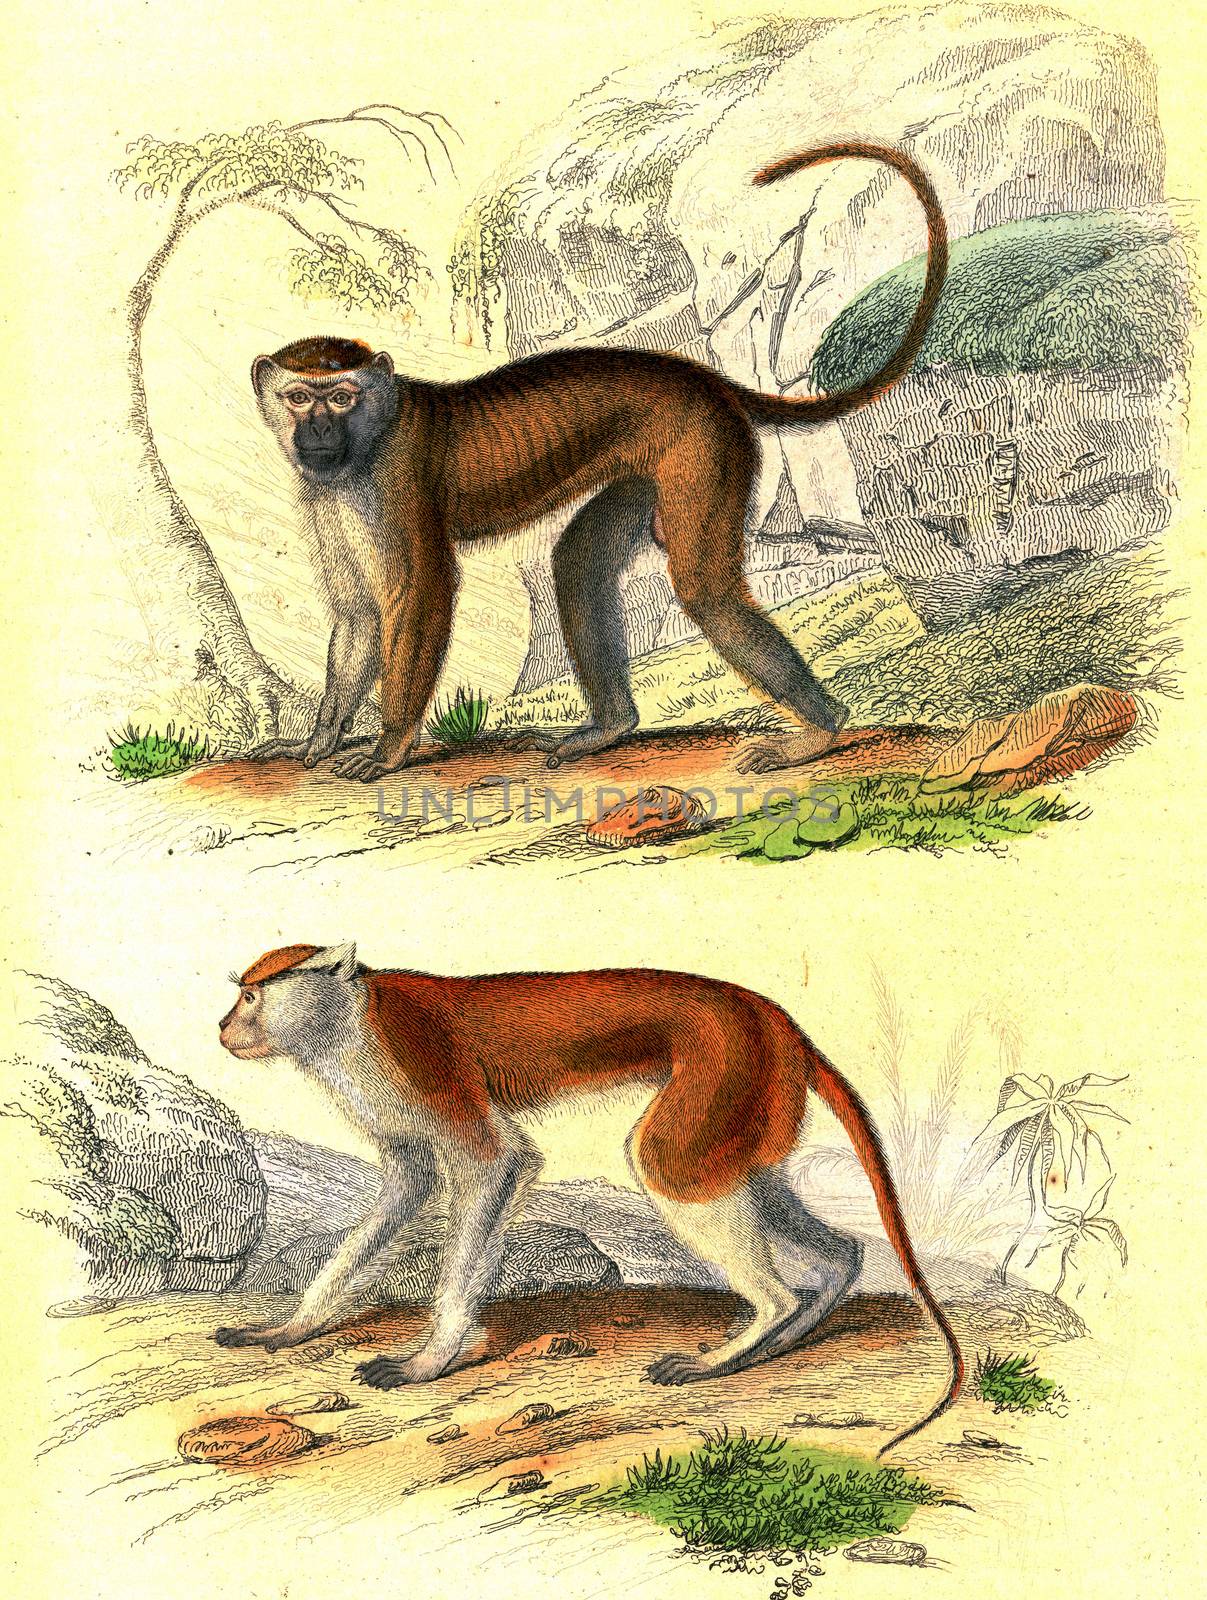 The Malbrouck, The Patas, vintage engraved illustration. From Buffon Complete Work.
